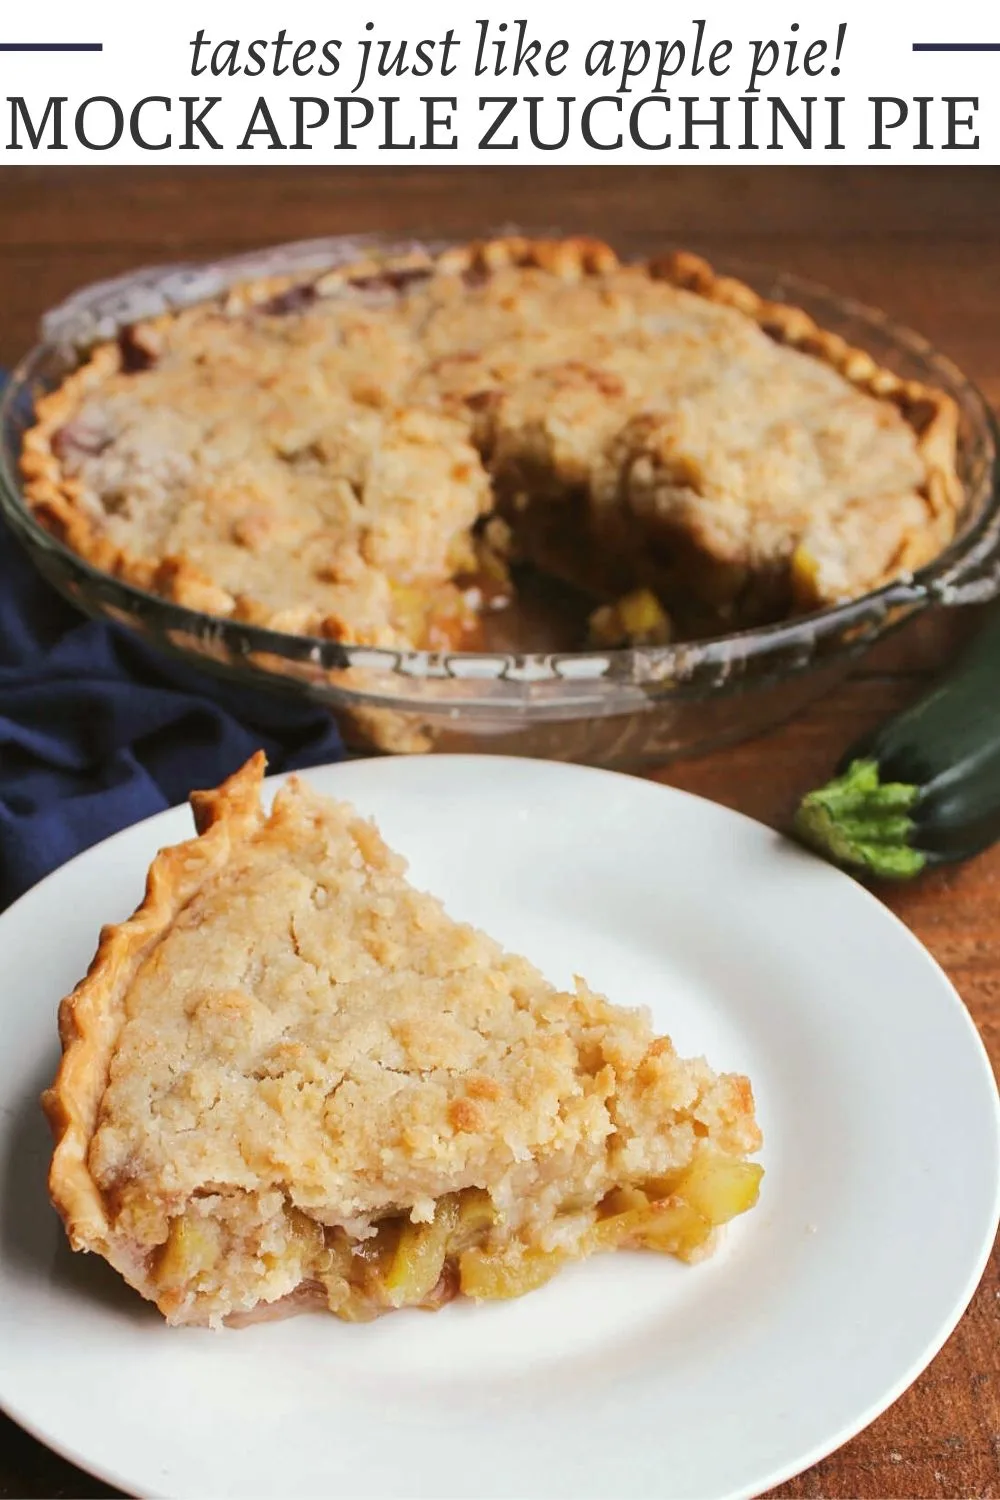 This mock apple zucchini pie is convincing enough to fool anyone. It tastes just like apple pie, but is really made with zucchini. The cinnamon spiced filling is topped with a buttery crumb for the perfect dessert.